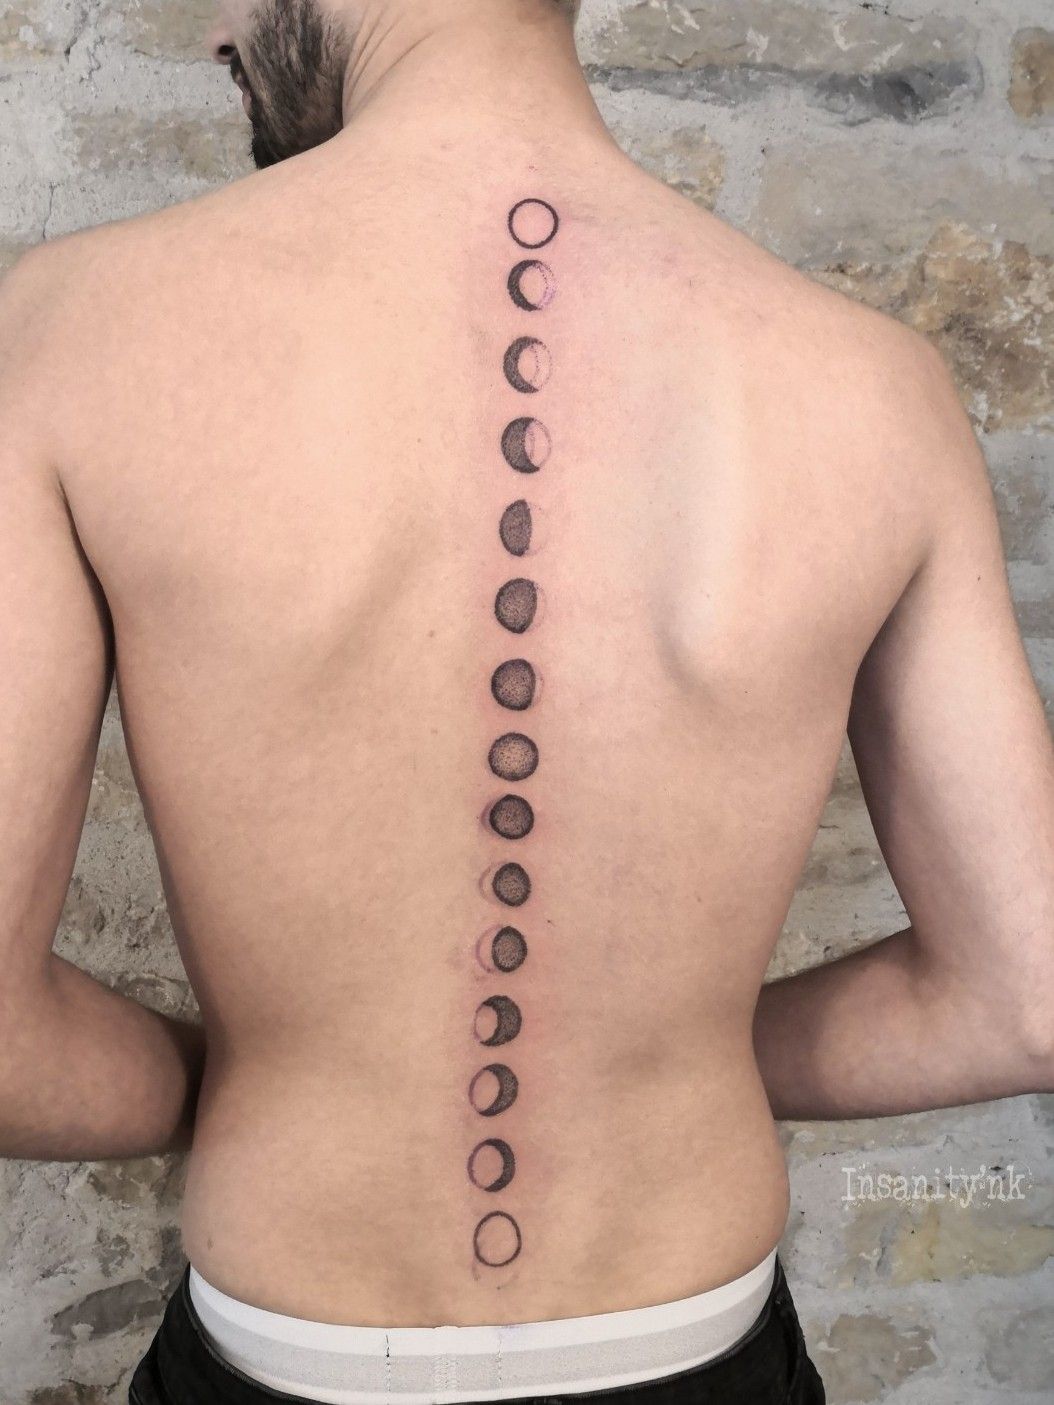 Lani Tattoos  Moon Phase back bottom ones look warped because of the  picture angle thanks for the trust Cant wait to see it healed  moonphases moon moonphasetattoo moontattoo tattoos tattoo ink 